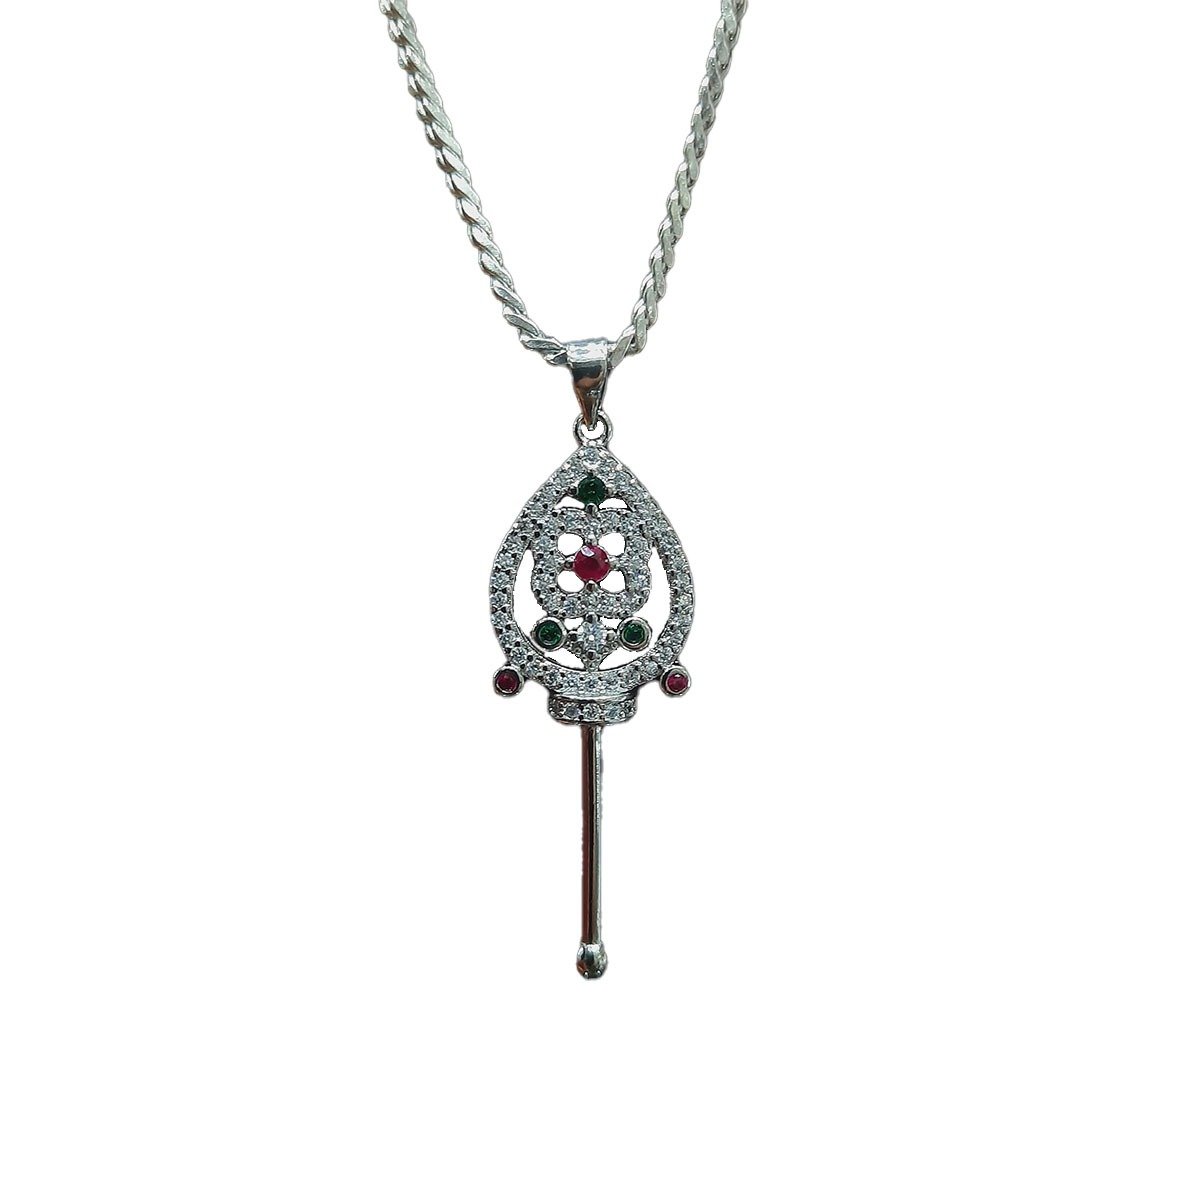 LORD MURUGAN VEL AYUTHAM PENDANT IN SILVER WITH MULTICOLOUR STONE